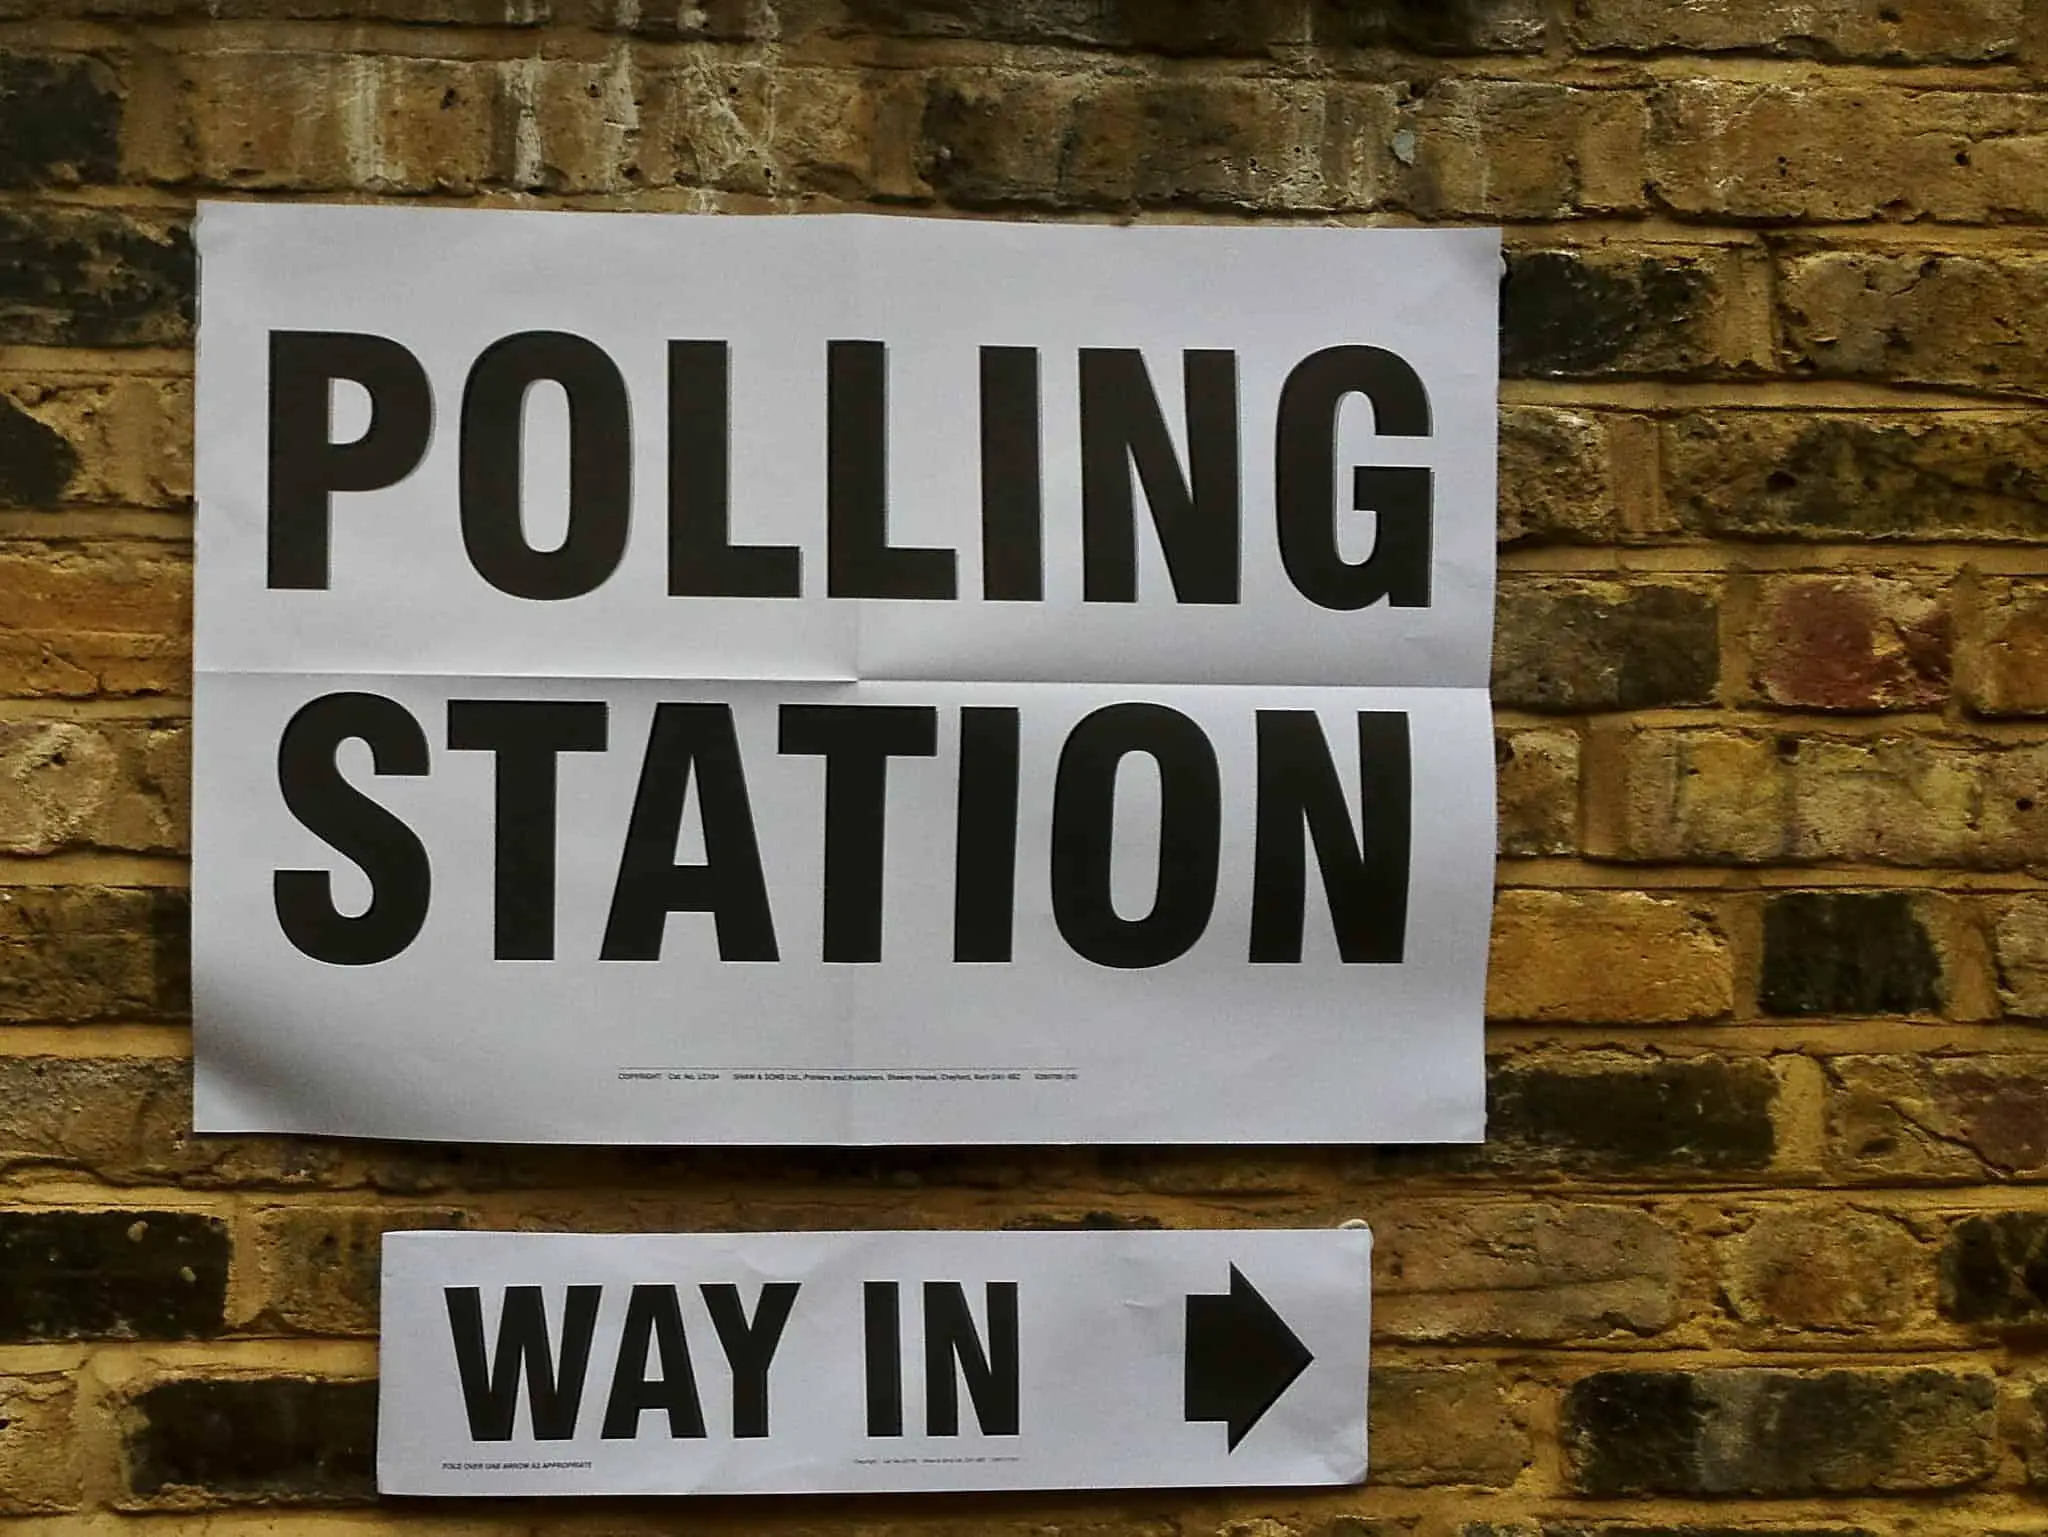 Polling station sign taped to a brick wall